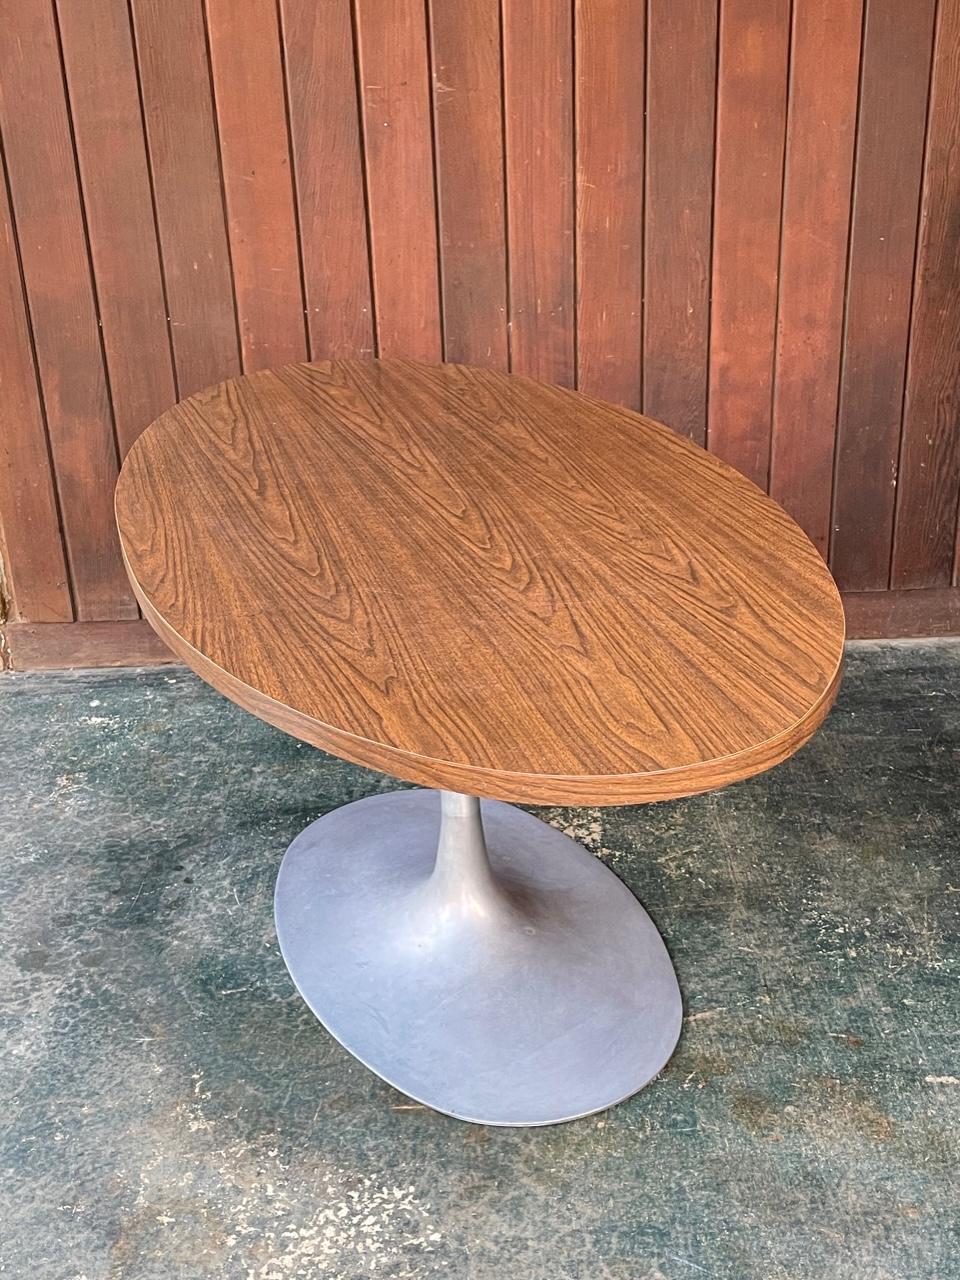 XL Oval Tulip Dining Table Space Age Jetsons Vintage Mid-Century Burke Arkana In Fair Condition For Sale In Hyattsville, MD